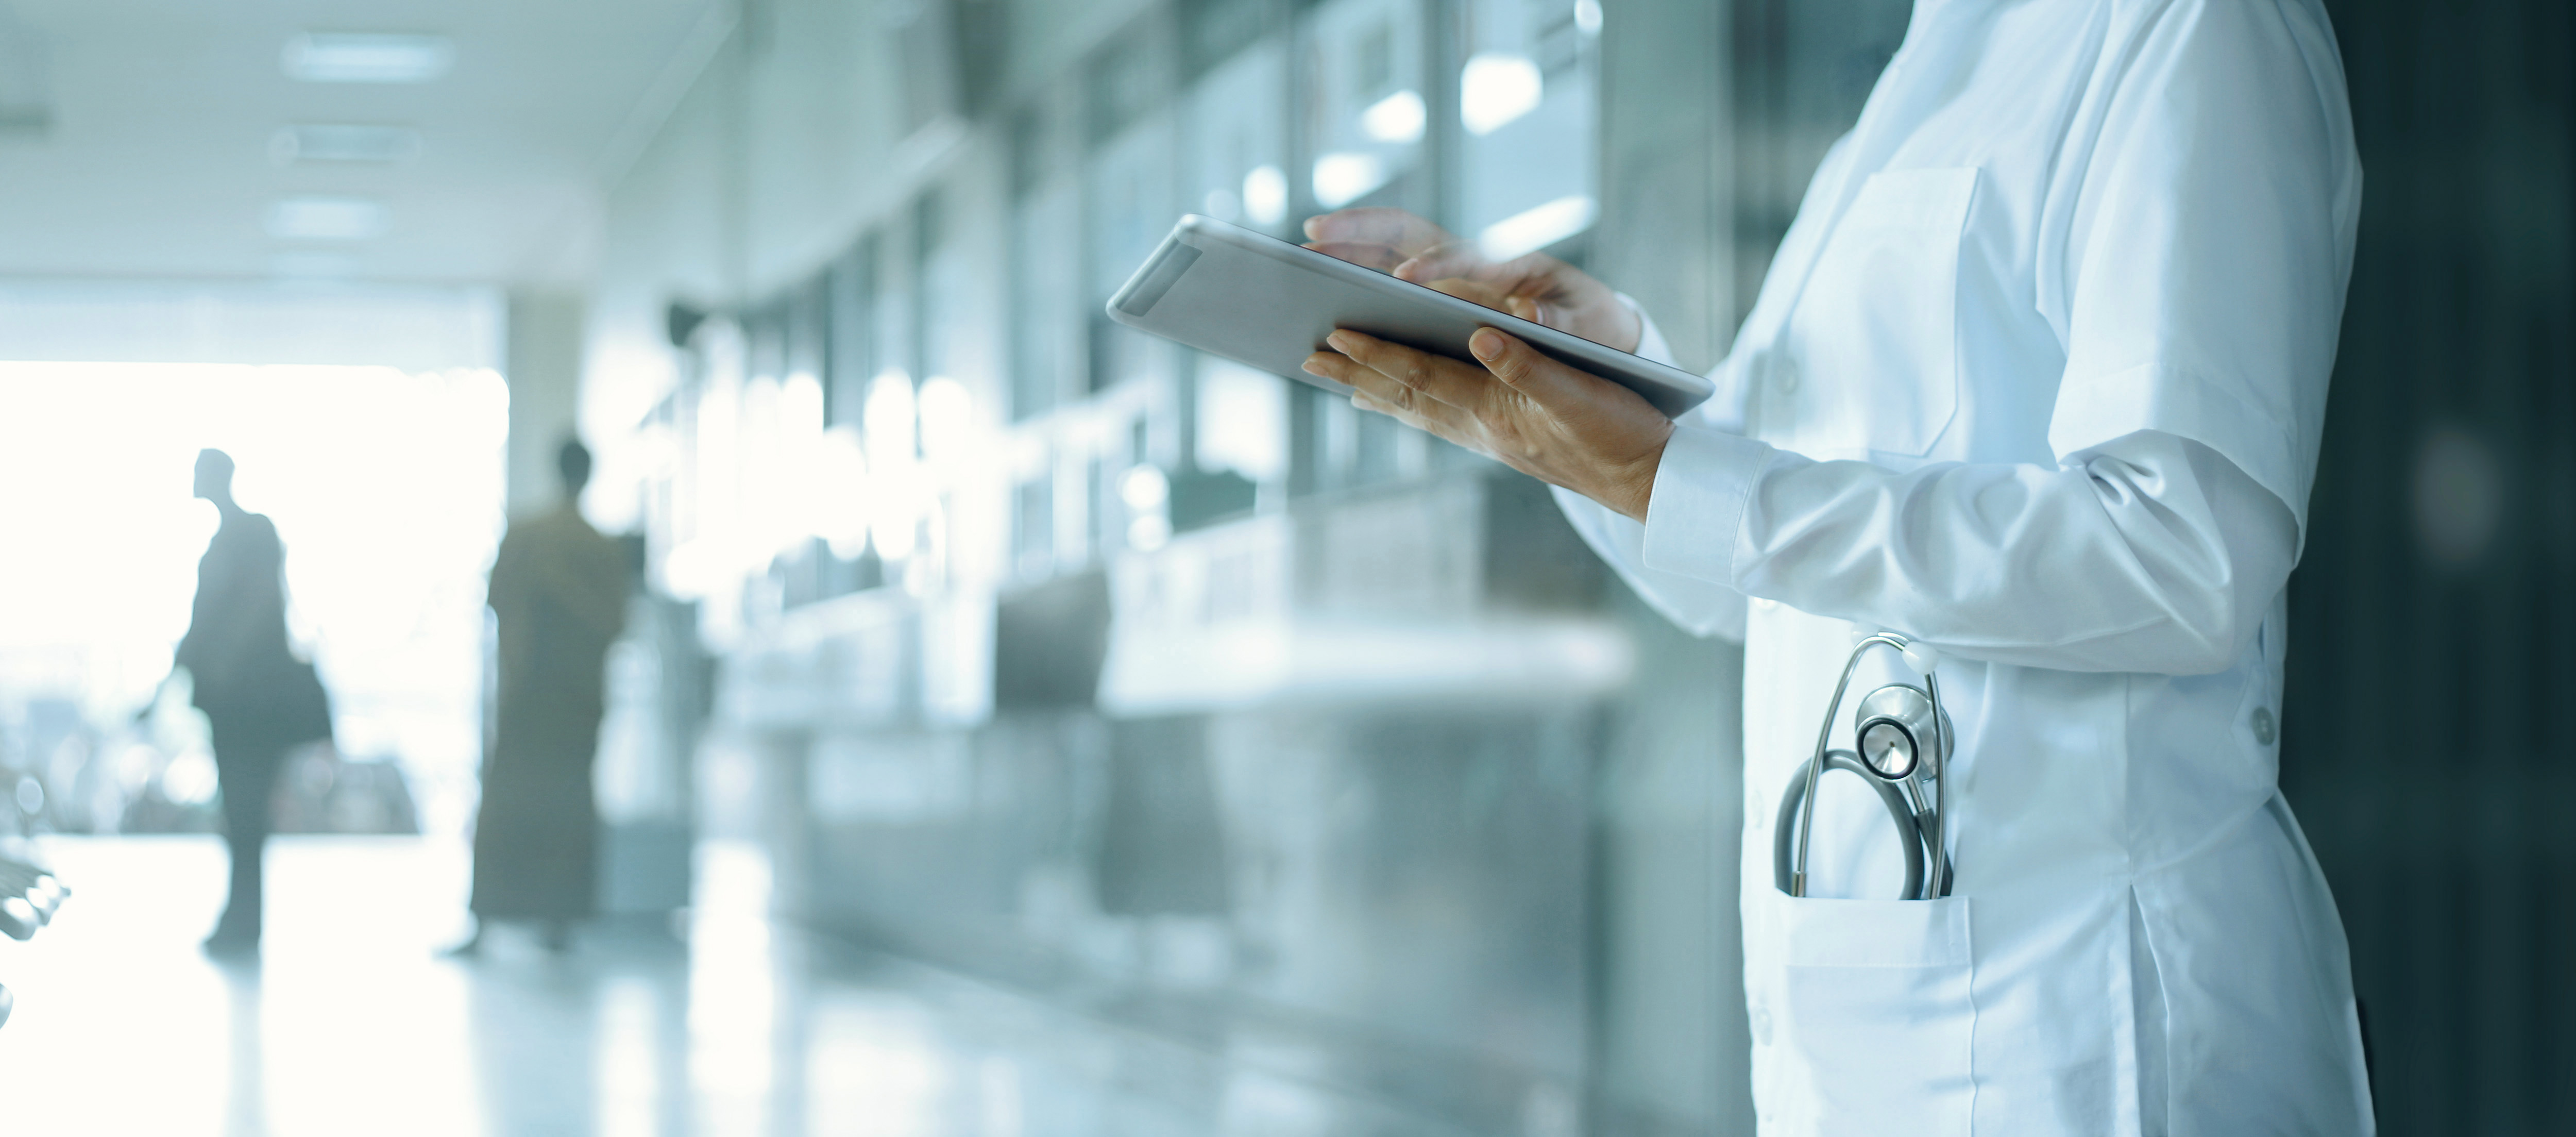 Healthcare and medicine. Medical and technology. Doctor working on digital tablet on hospital background